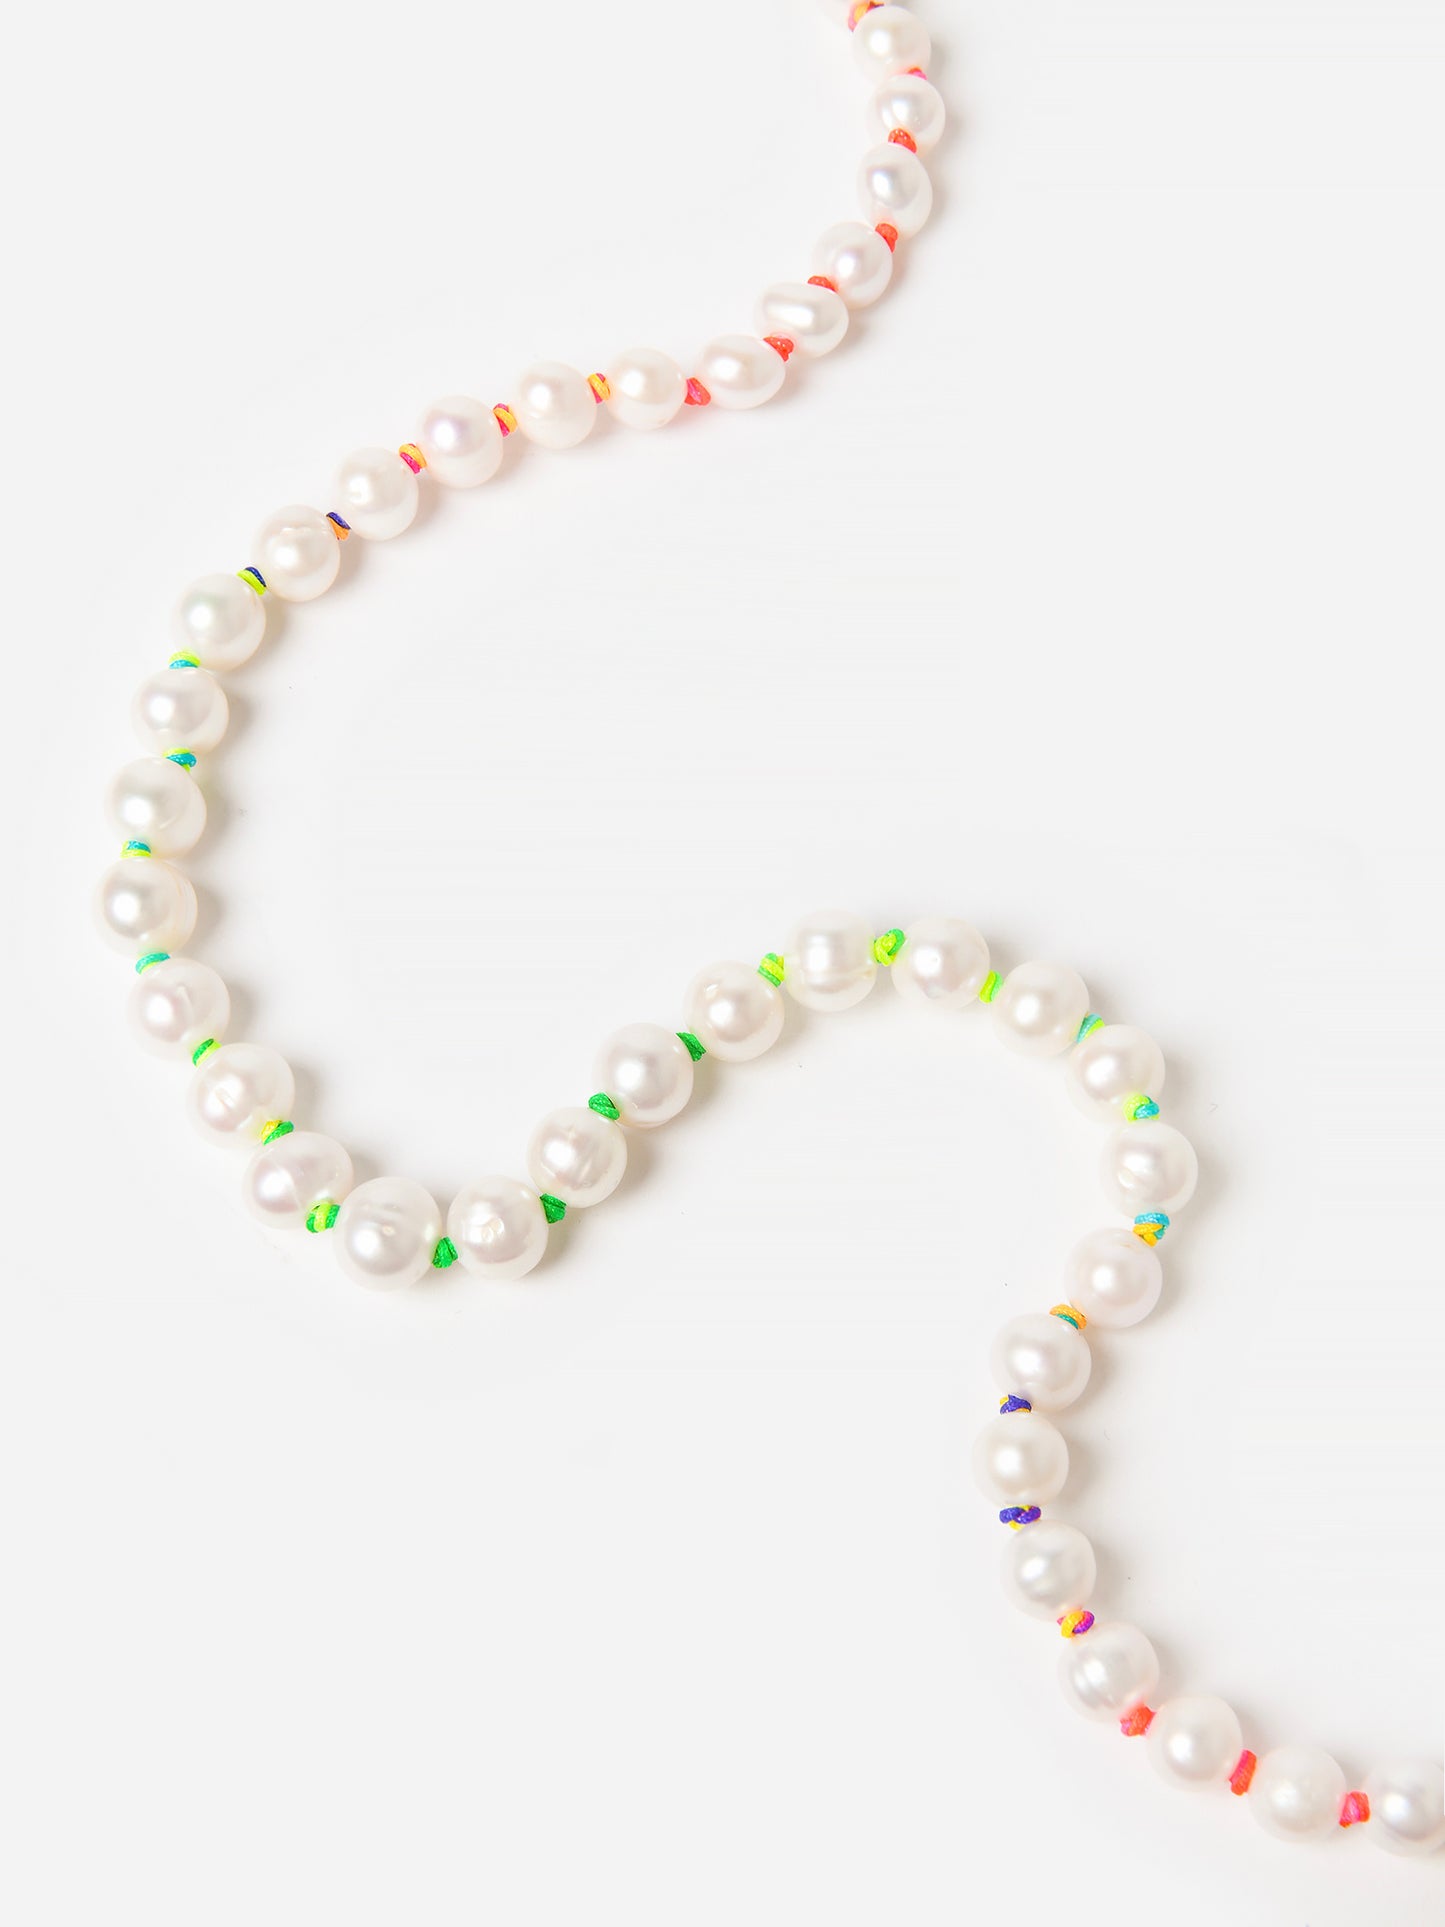 Martha Calvo Women's Neon Knotted Necklace